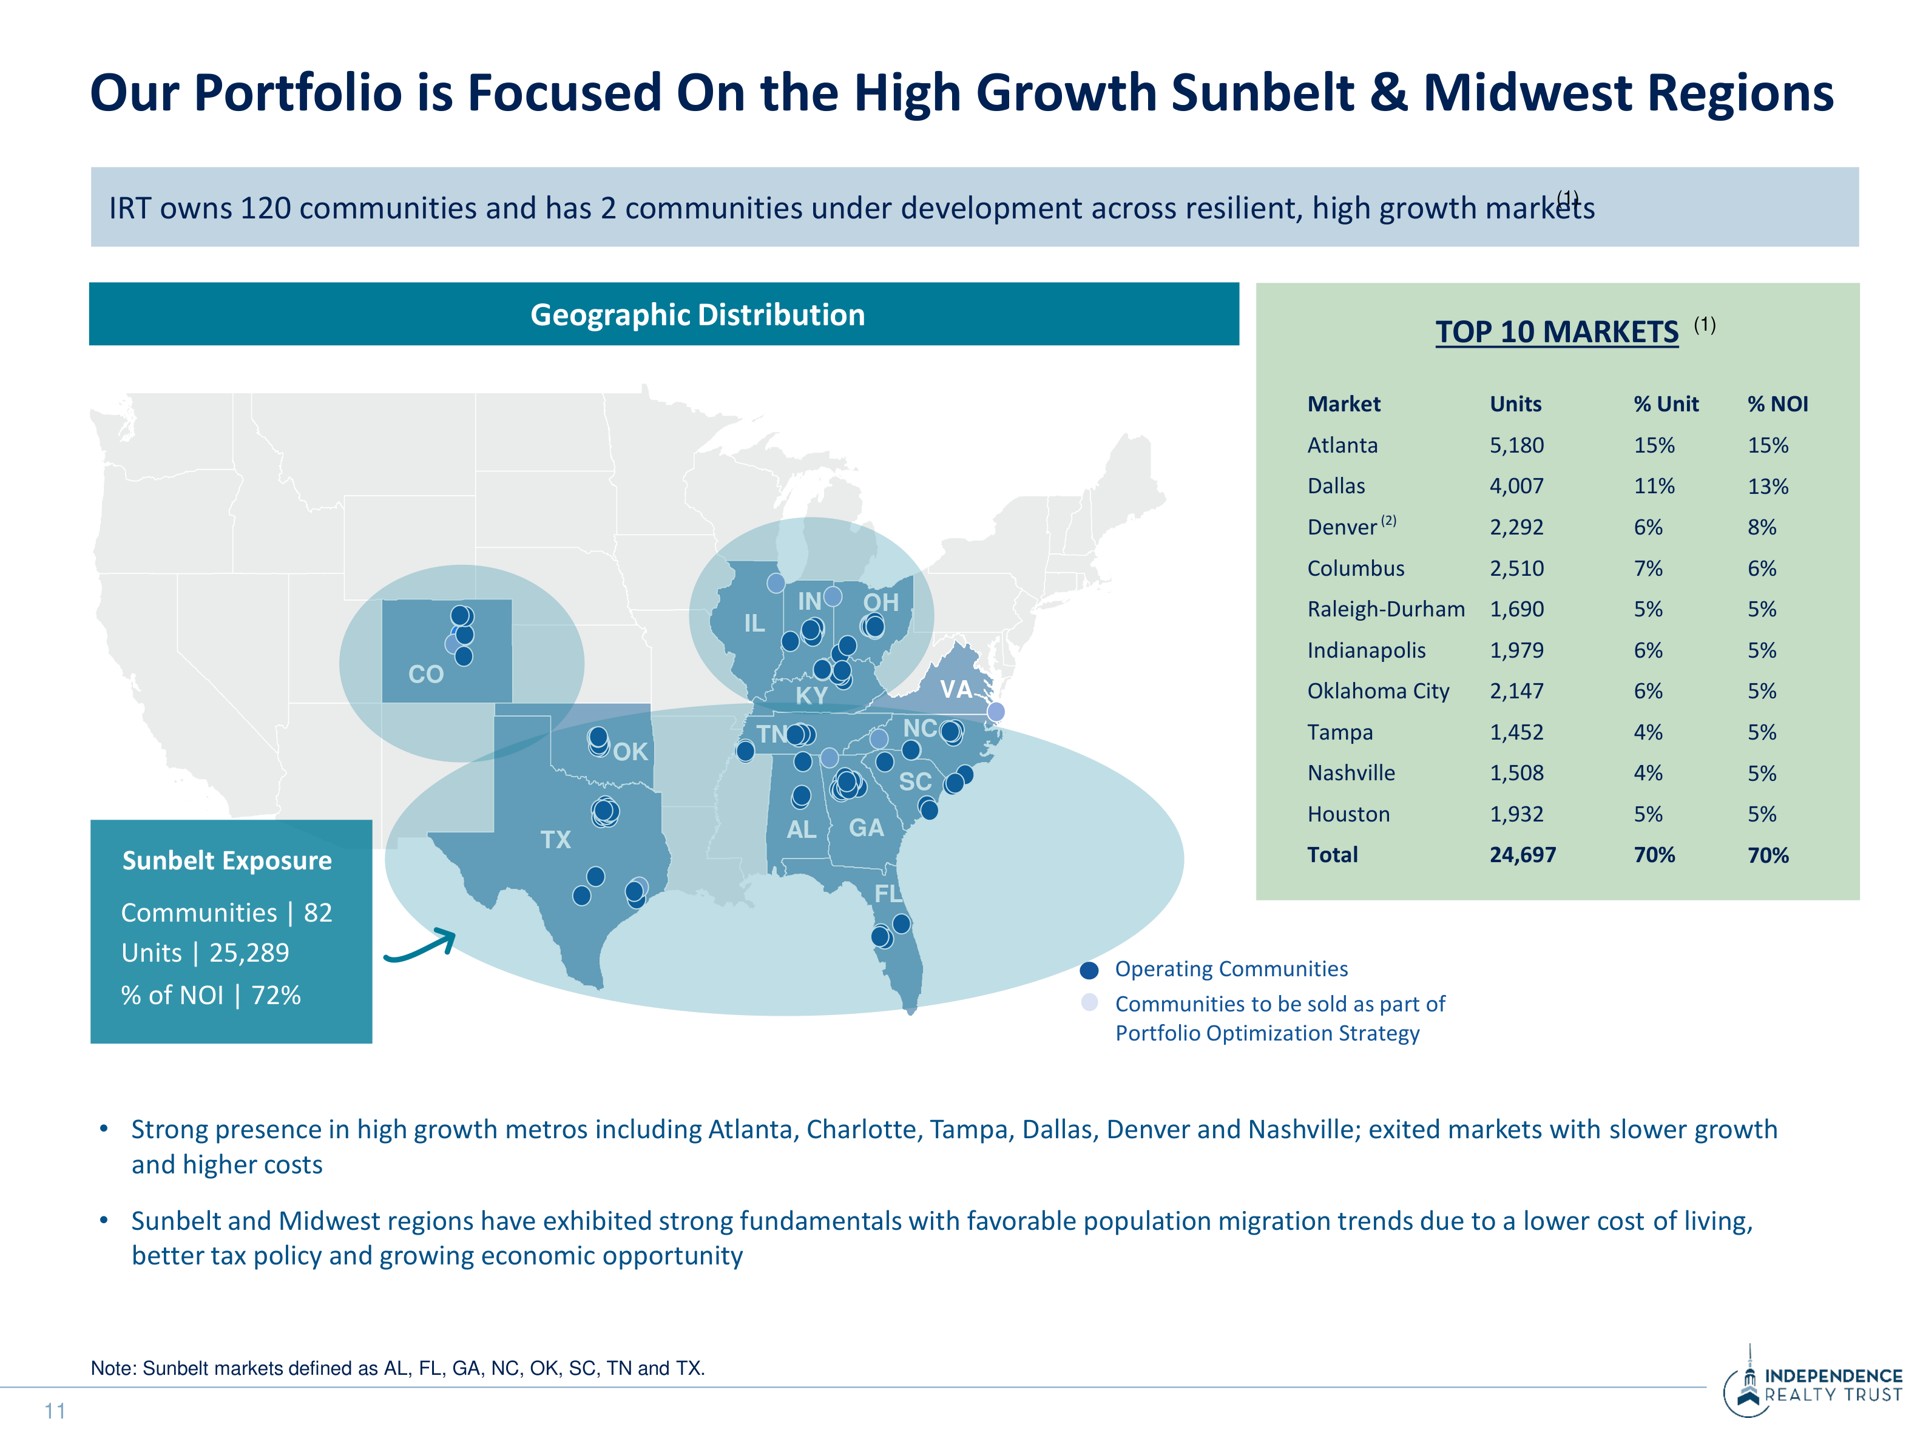 our portfolio is focused on the high growth regions portfolio summary geographic distribution top markets | Independence Realty Trust